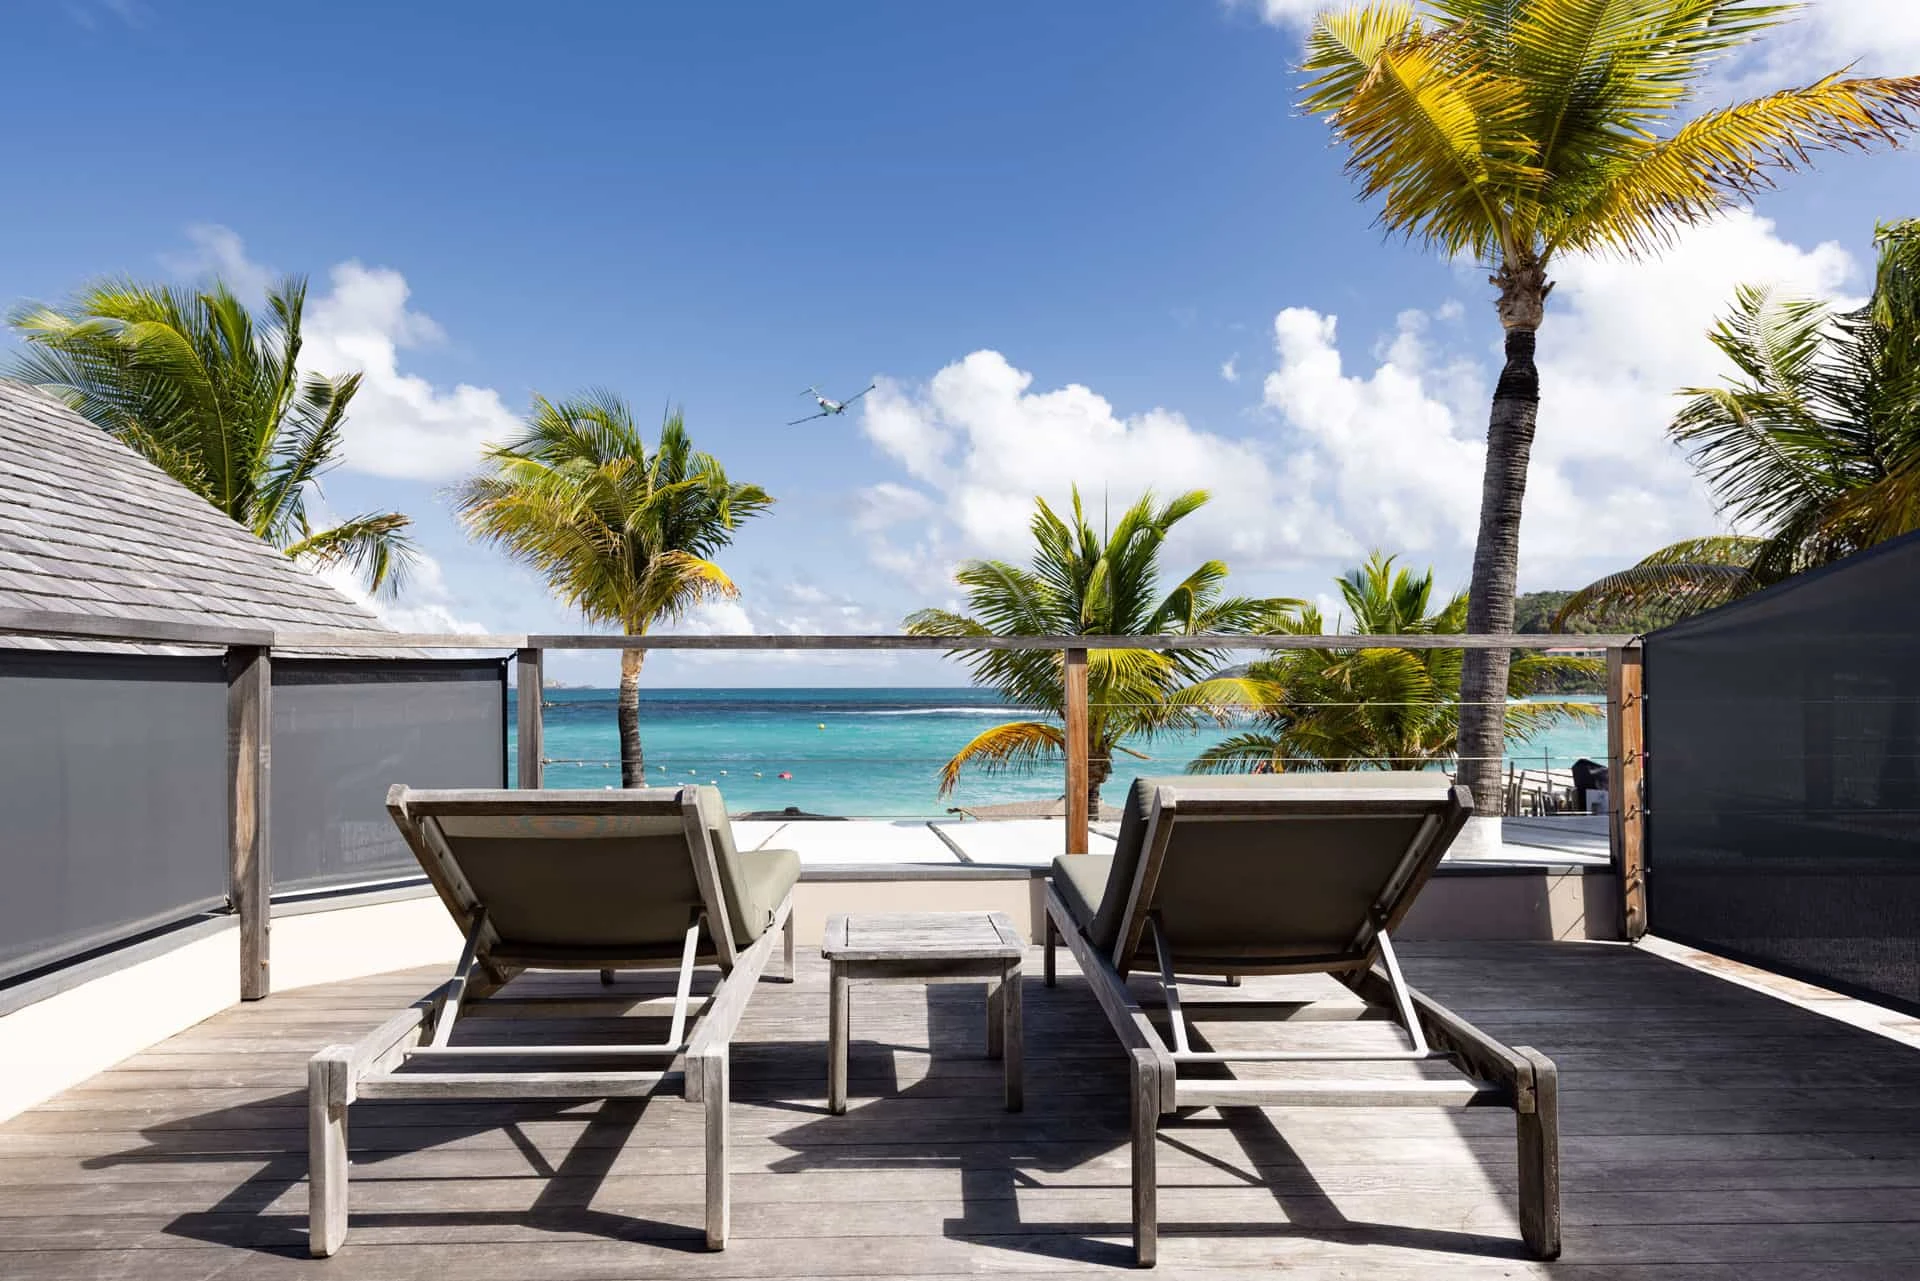 Porch View at the Deluxe Sea View Room © Pearl Beach, St Barth